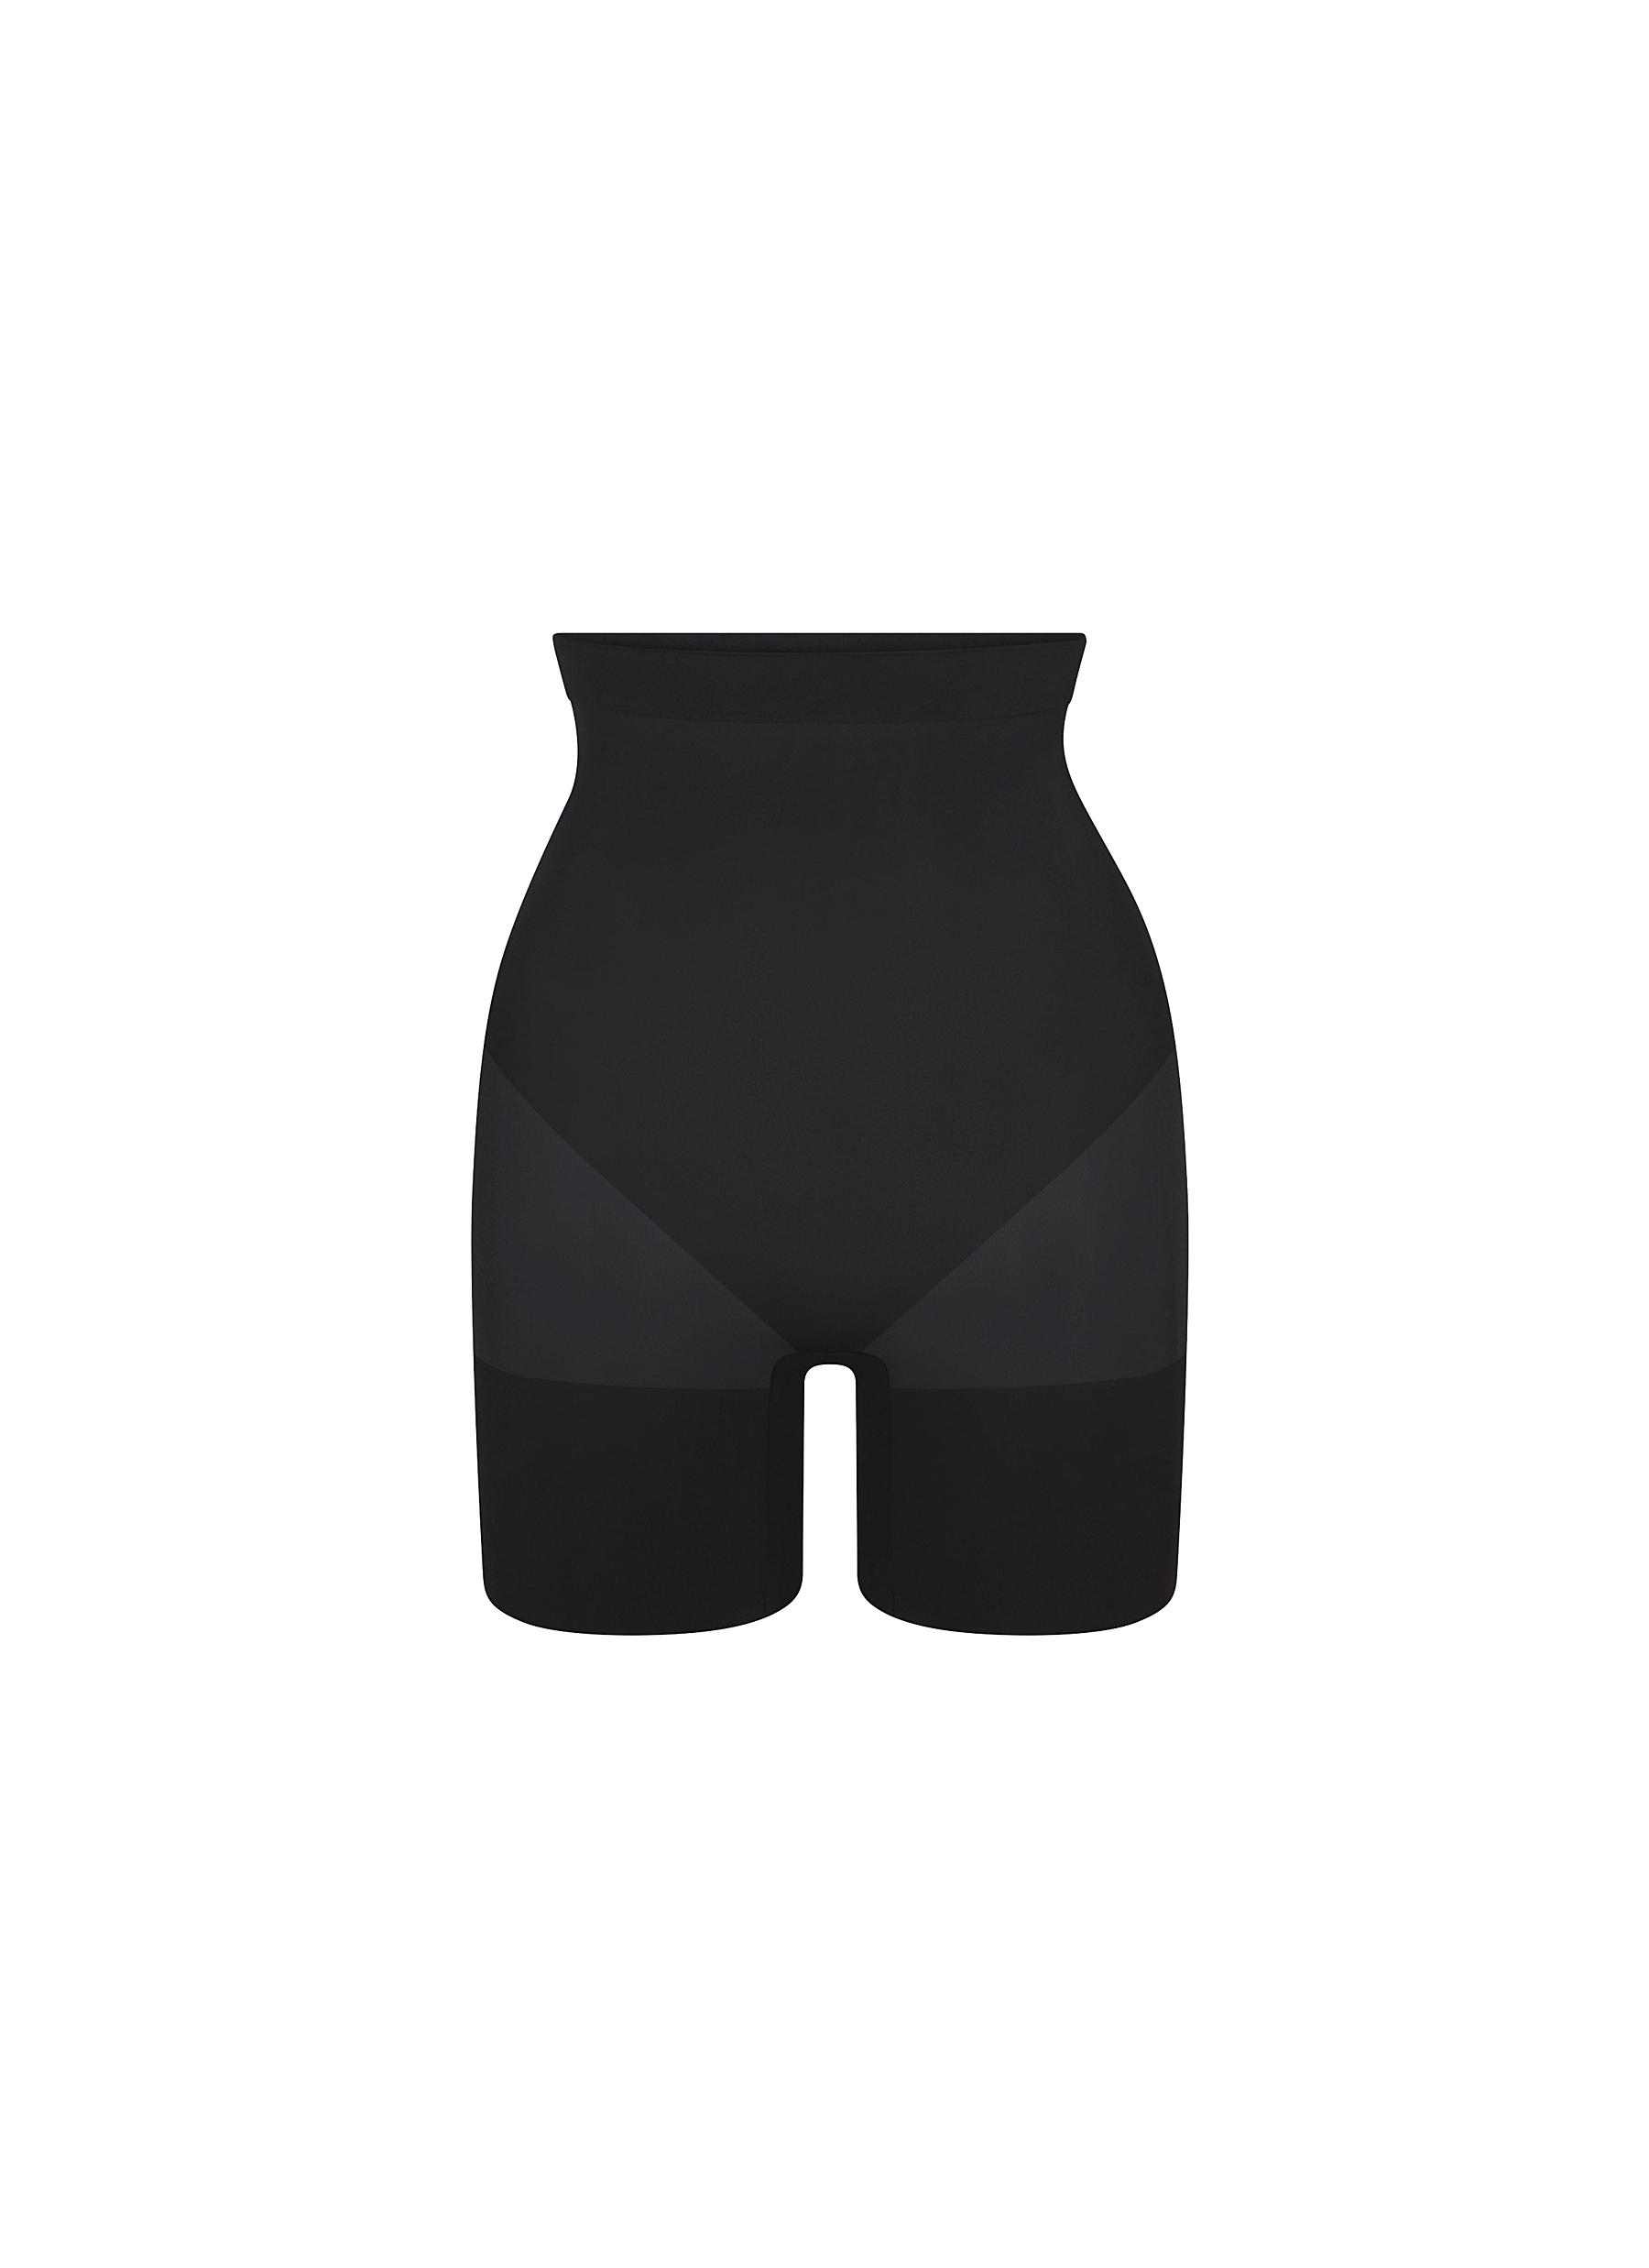 Everyday Sculpt High-Waisted Mid Thigh Shorts